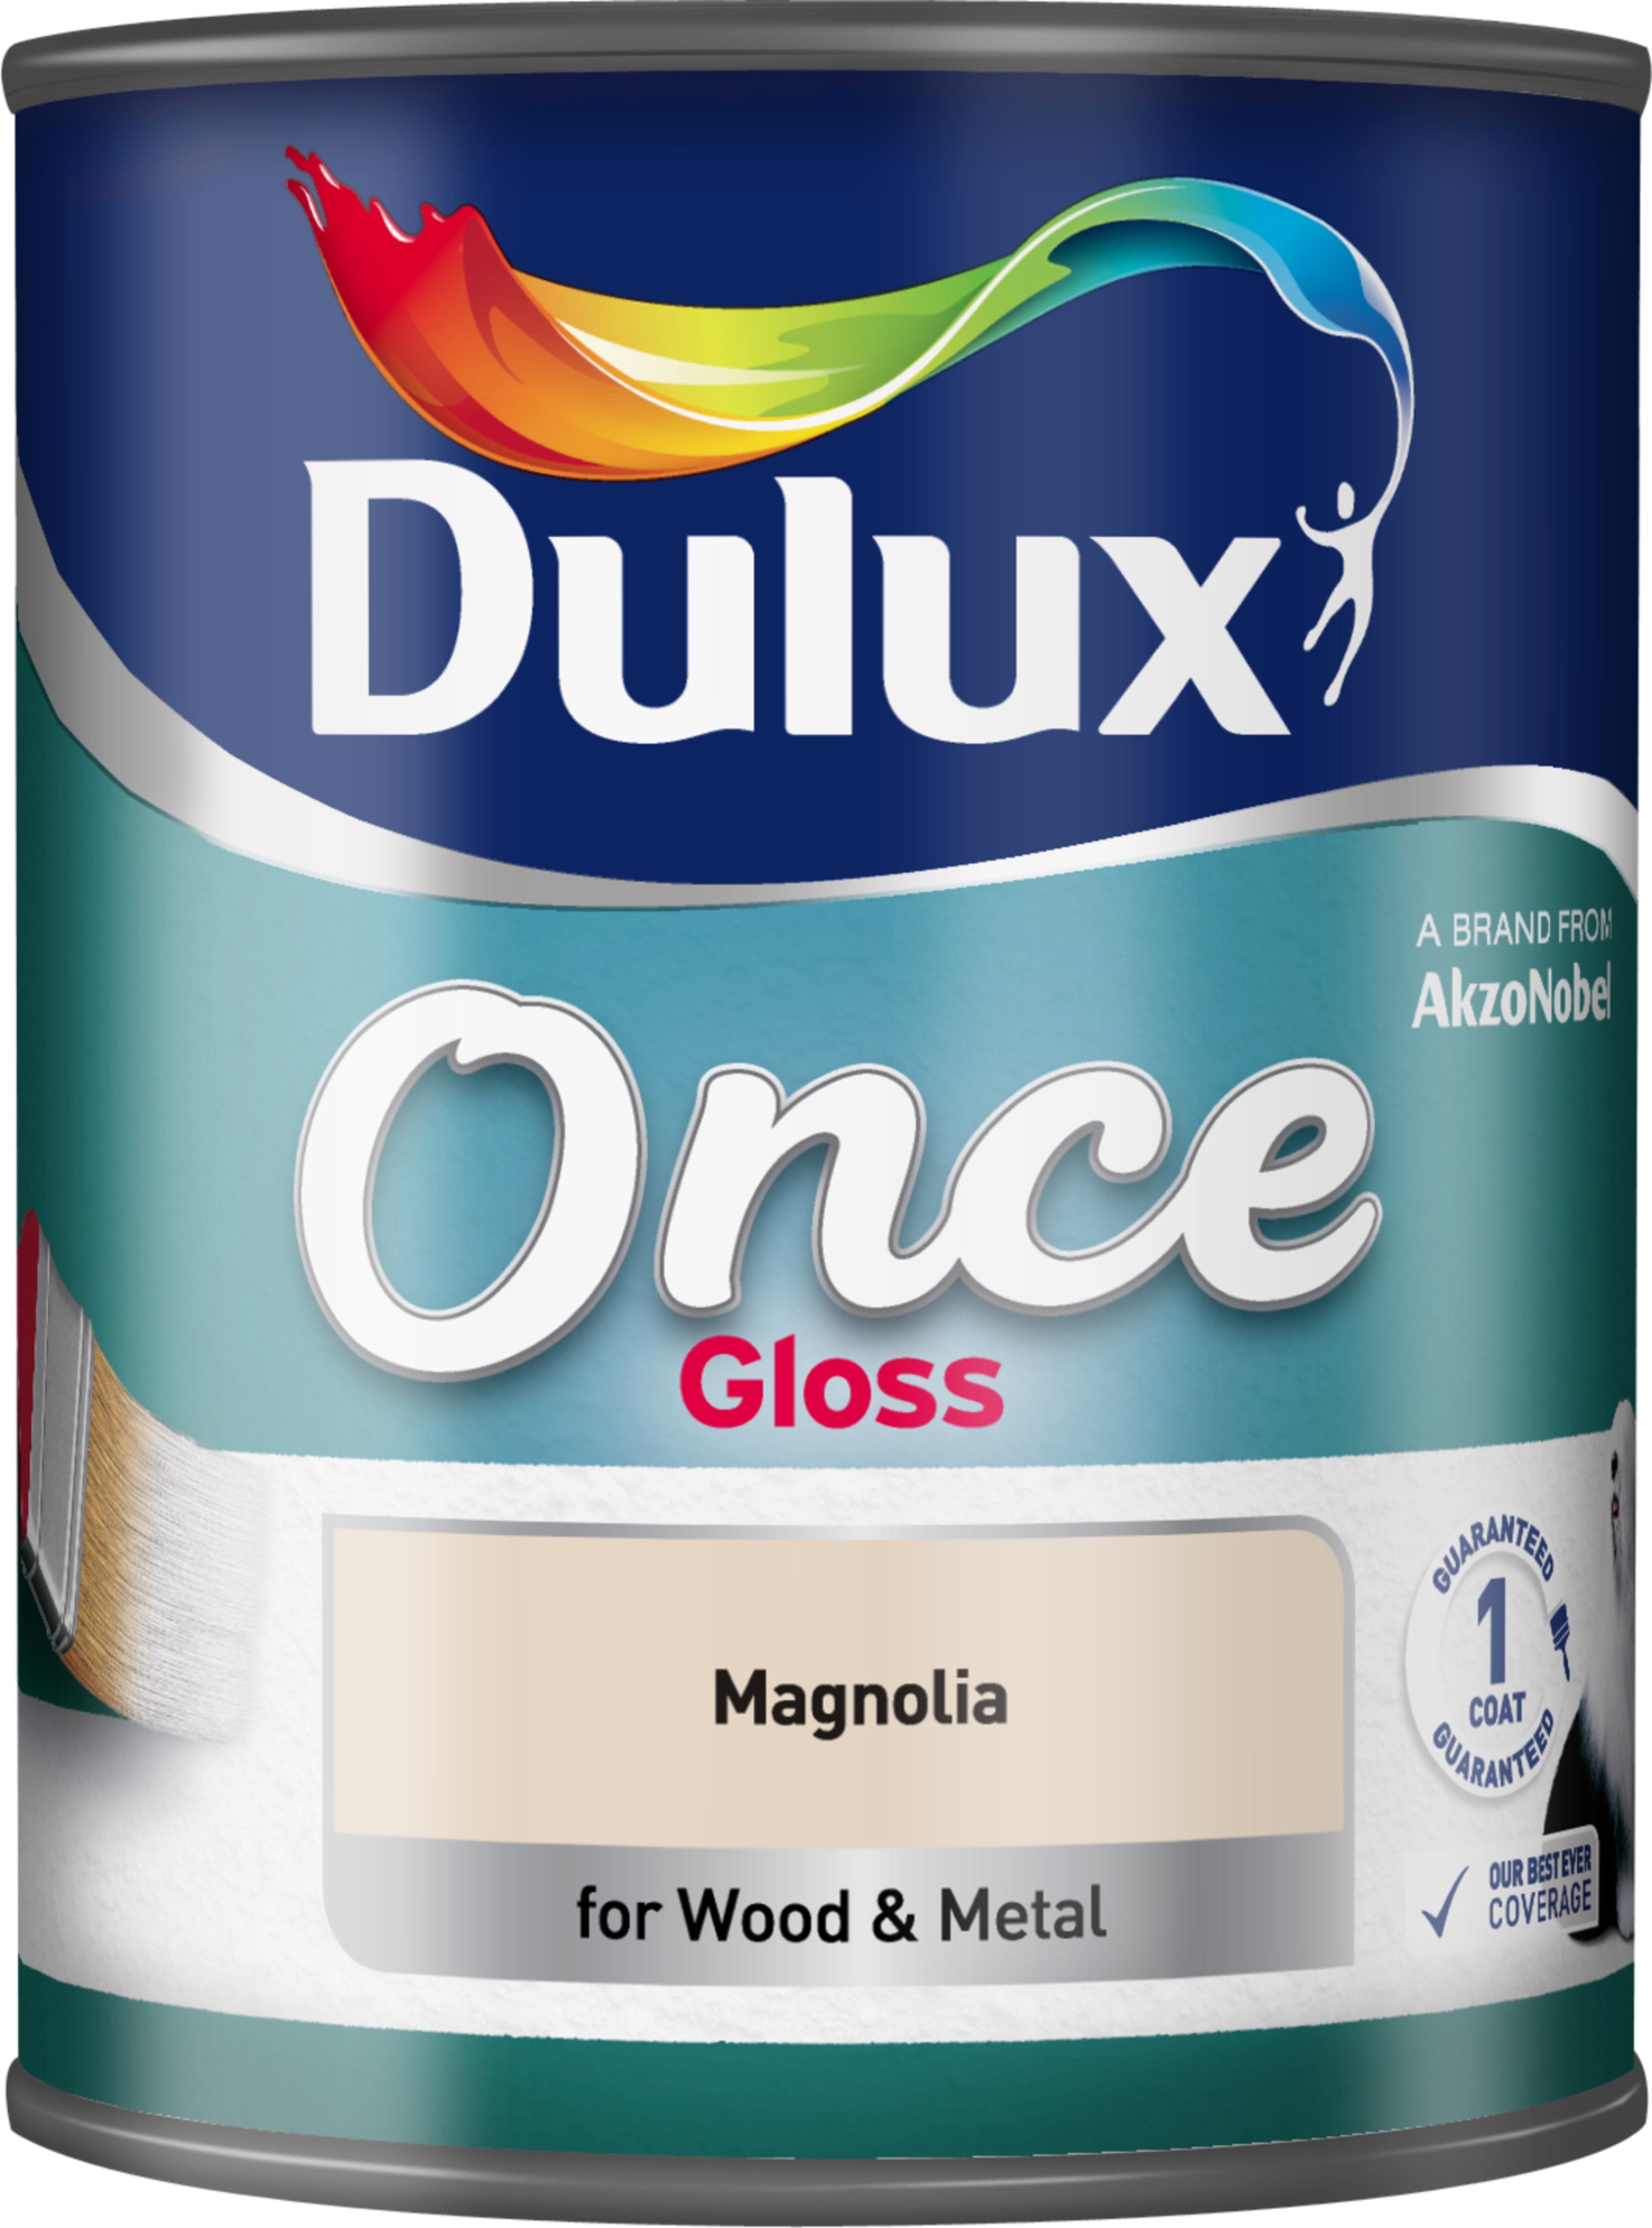 Dulux-Once-Gloss-Paint-For-Wood-And-Metal-Magnolia-750ml